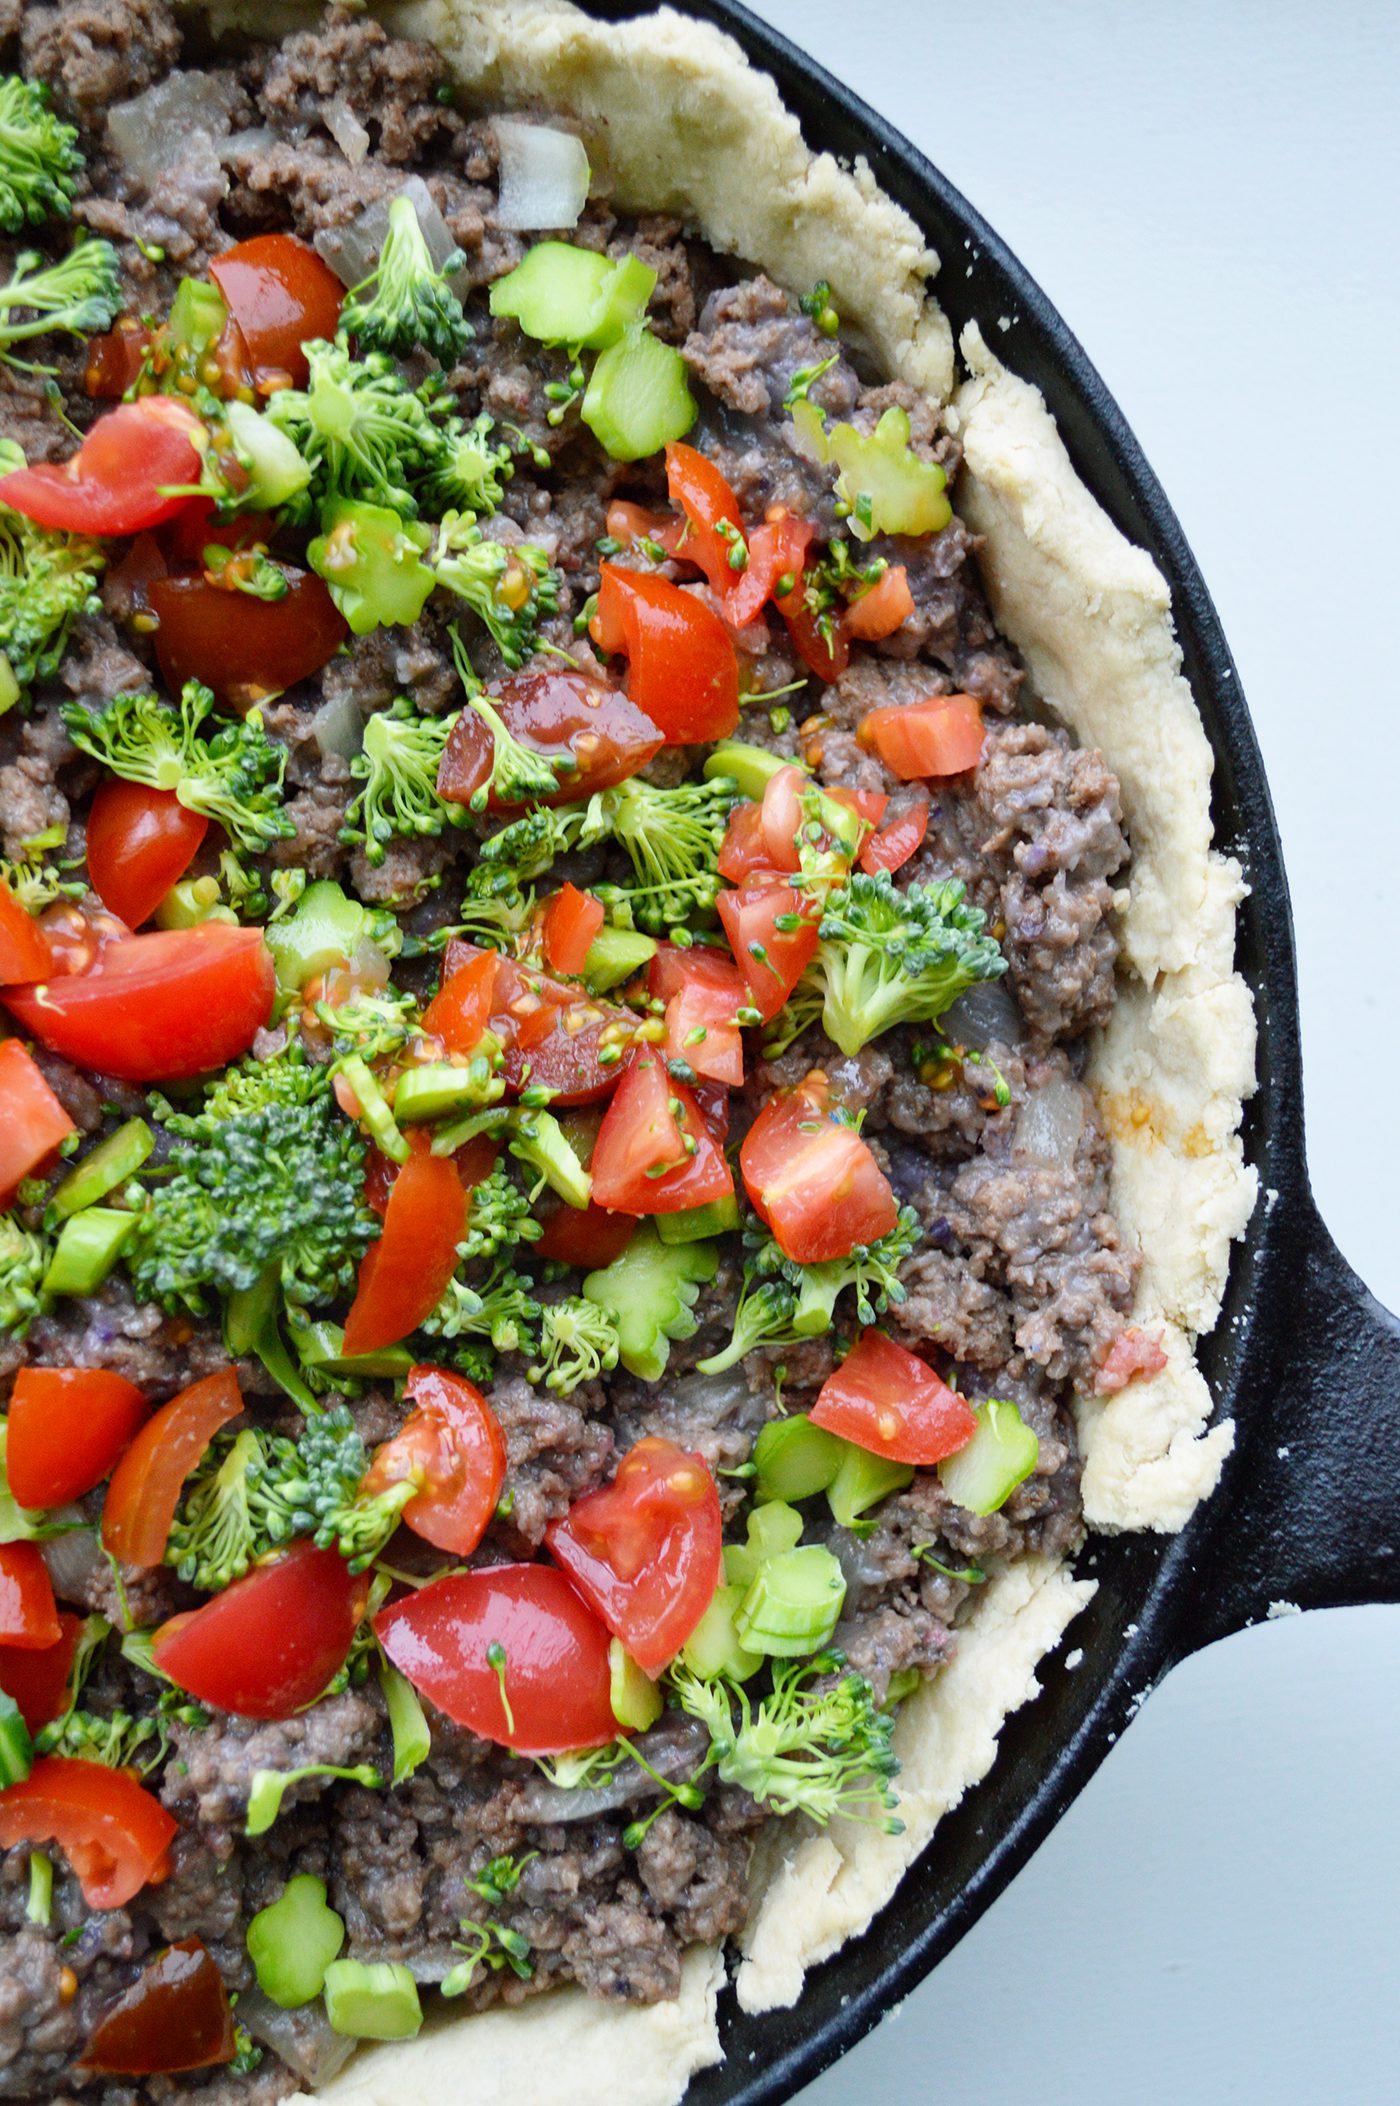 Rustic Ground Bison and Beef Skillet